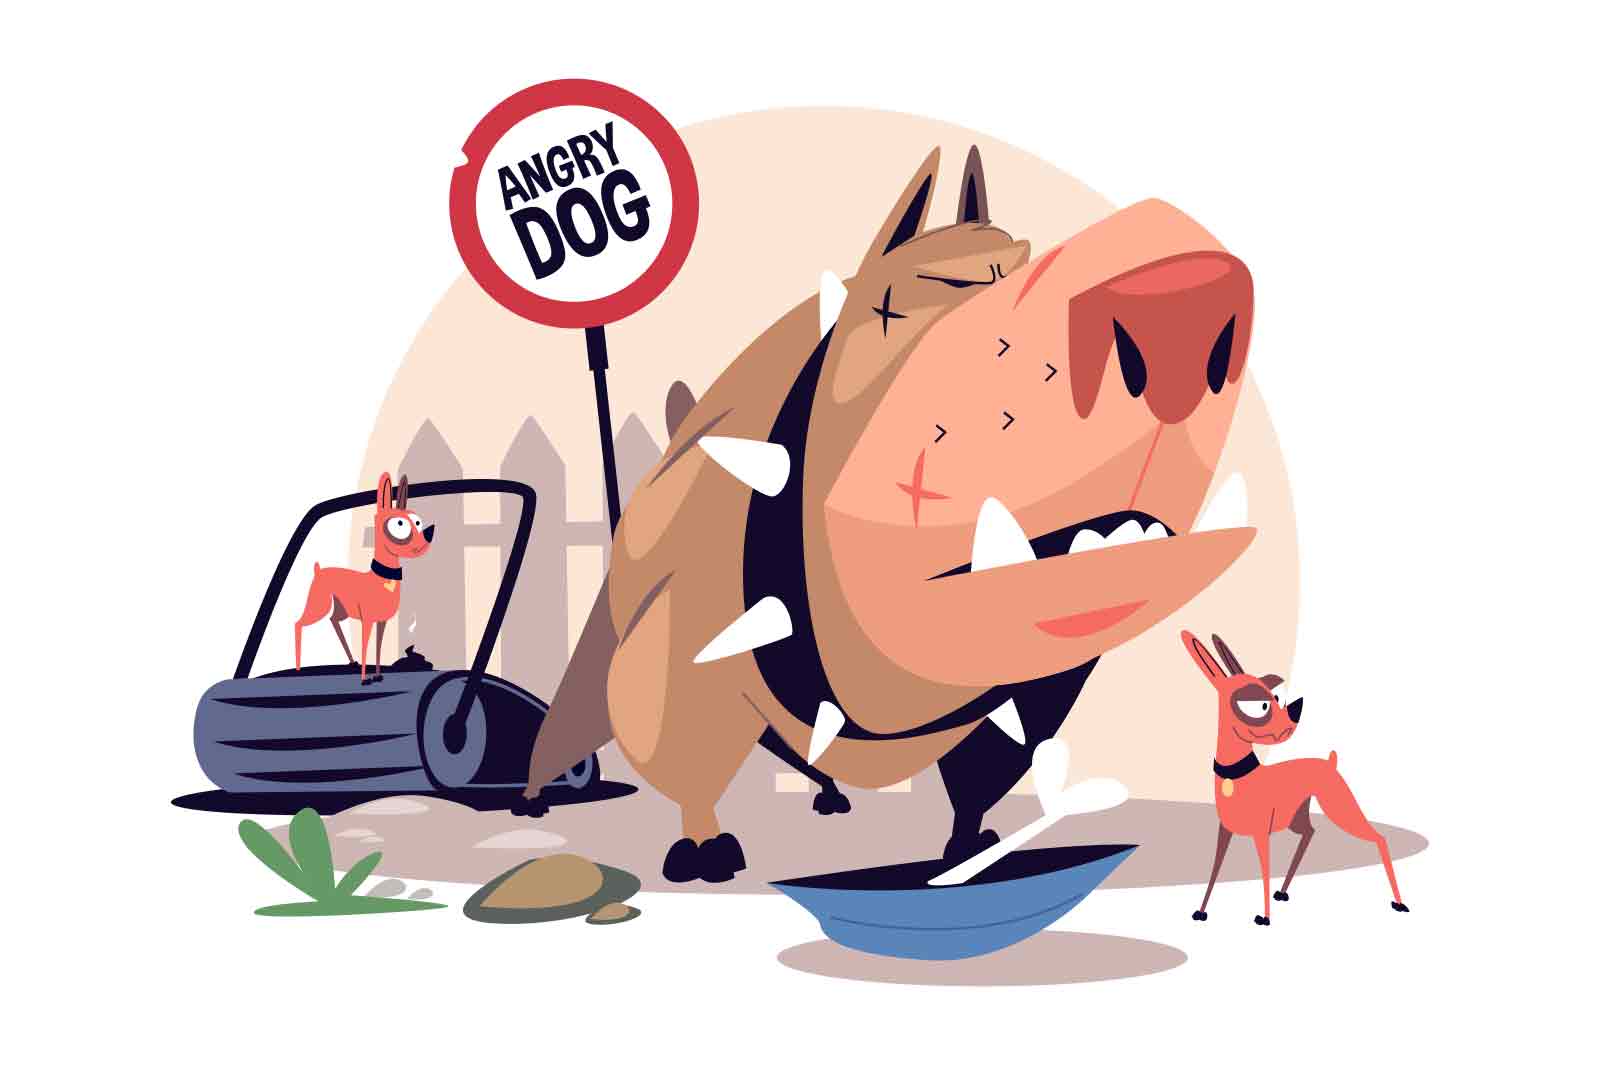 Angry pitbull dog in collar with spikes vector illustration. Angry dog sign. Fighting dogs flat style concept